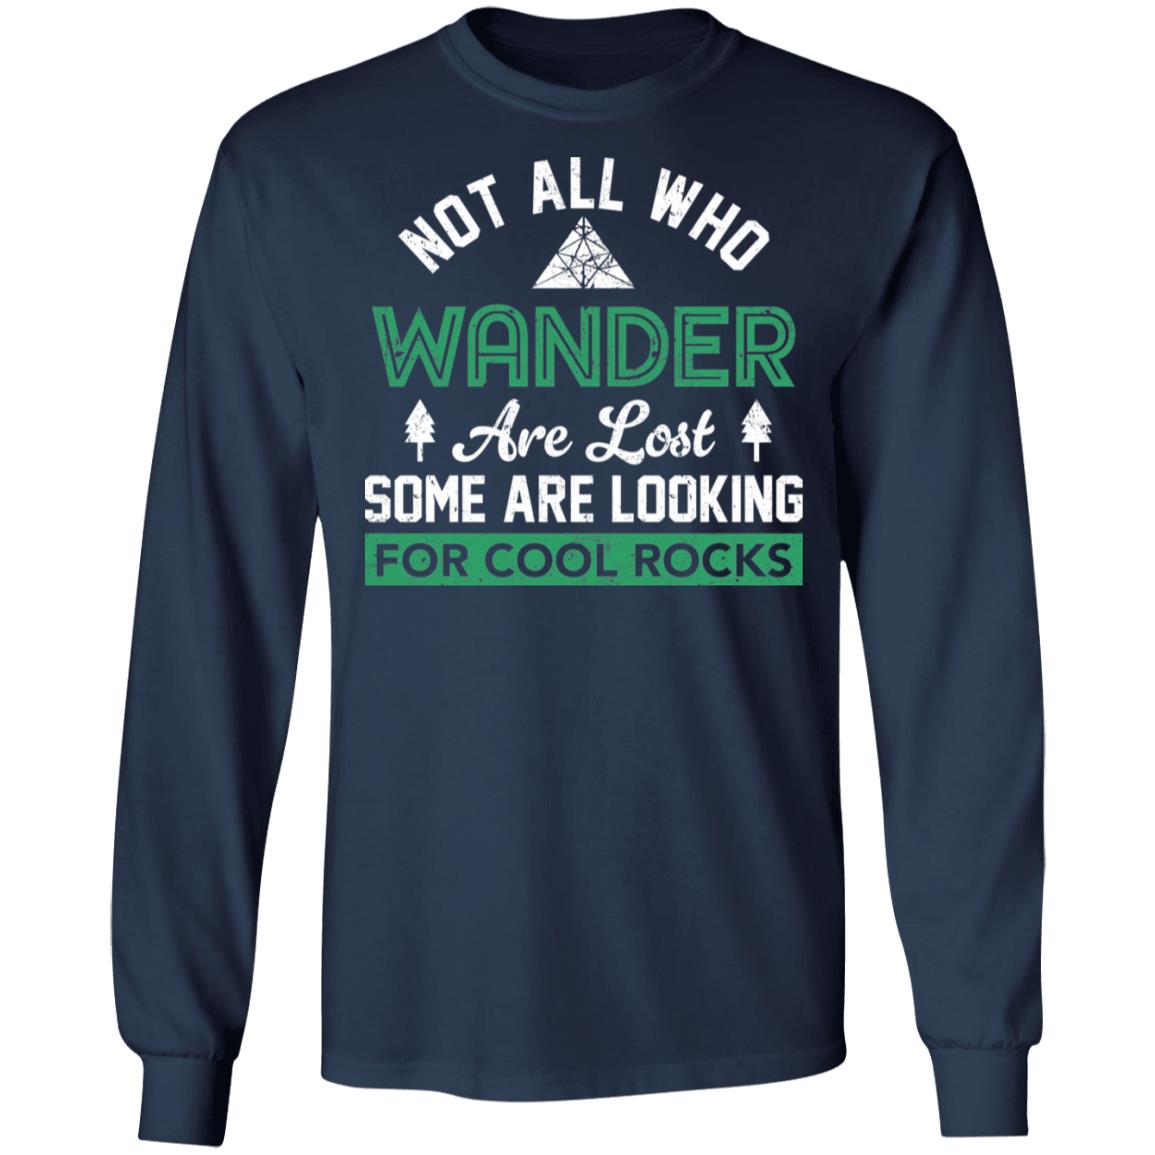 Not all who wander are lost some are looking for cool rocks shirt ...